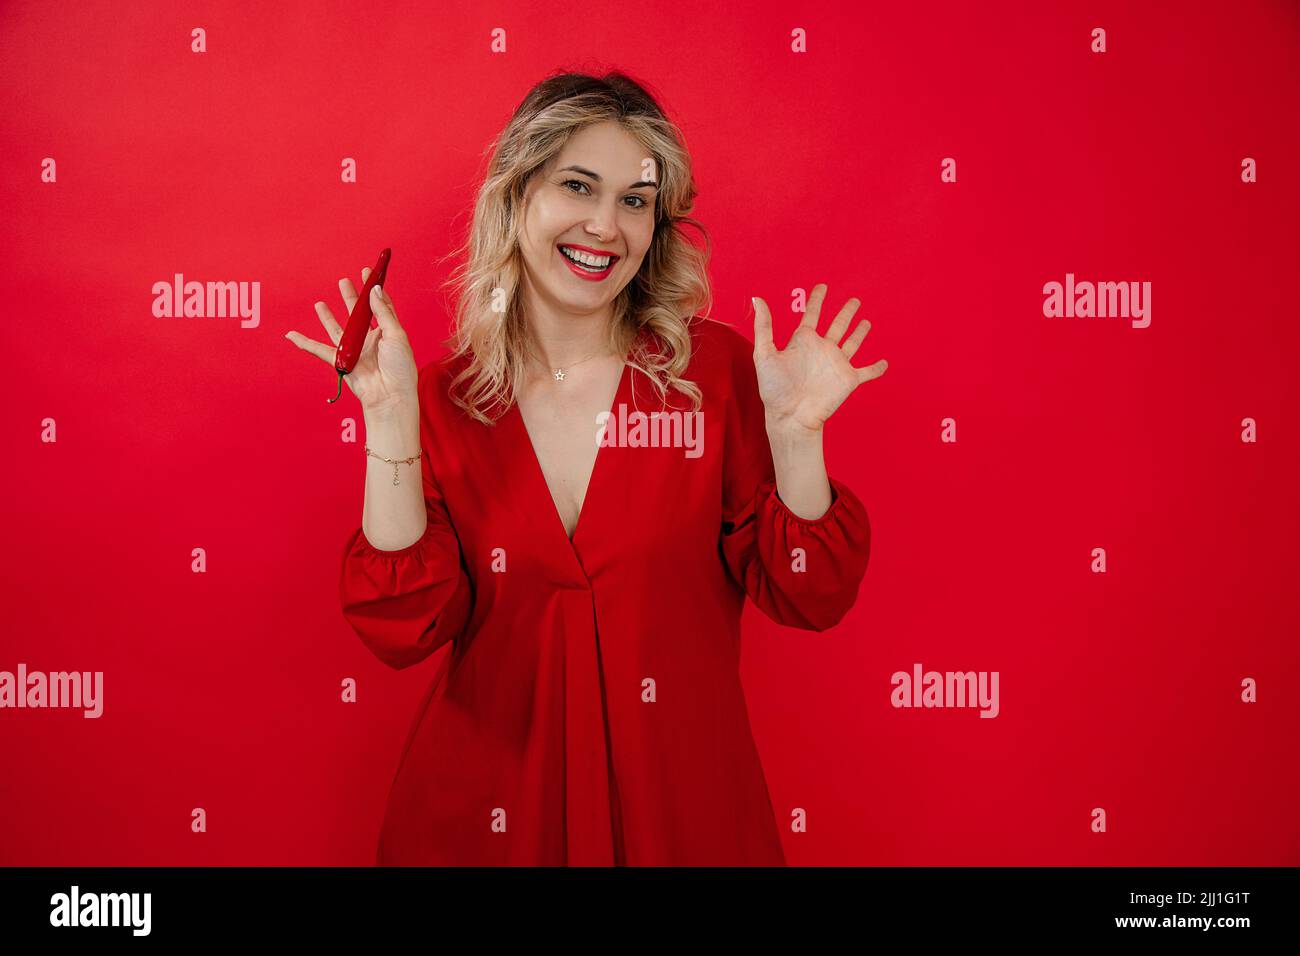 Laughing glad blond woman in red dress holding hot pepper in hand, shaking arms and gesturing, look at camera. Broadcast Stock Photo